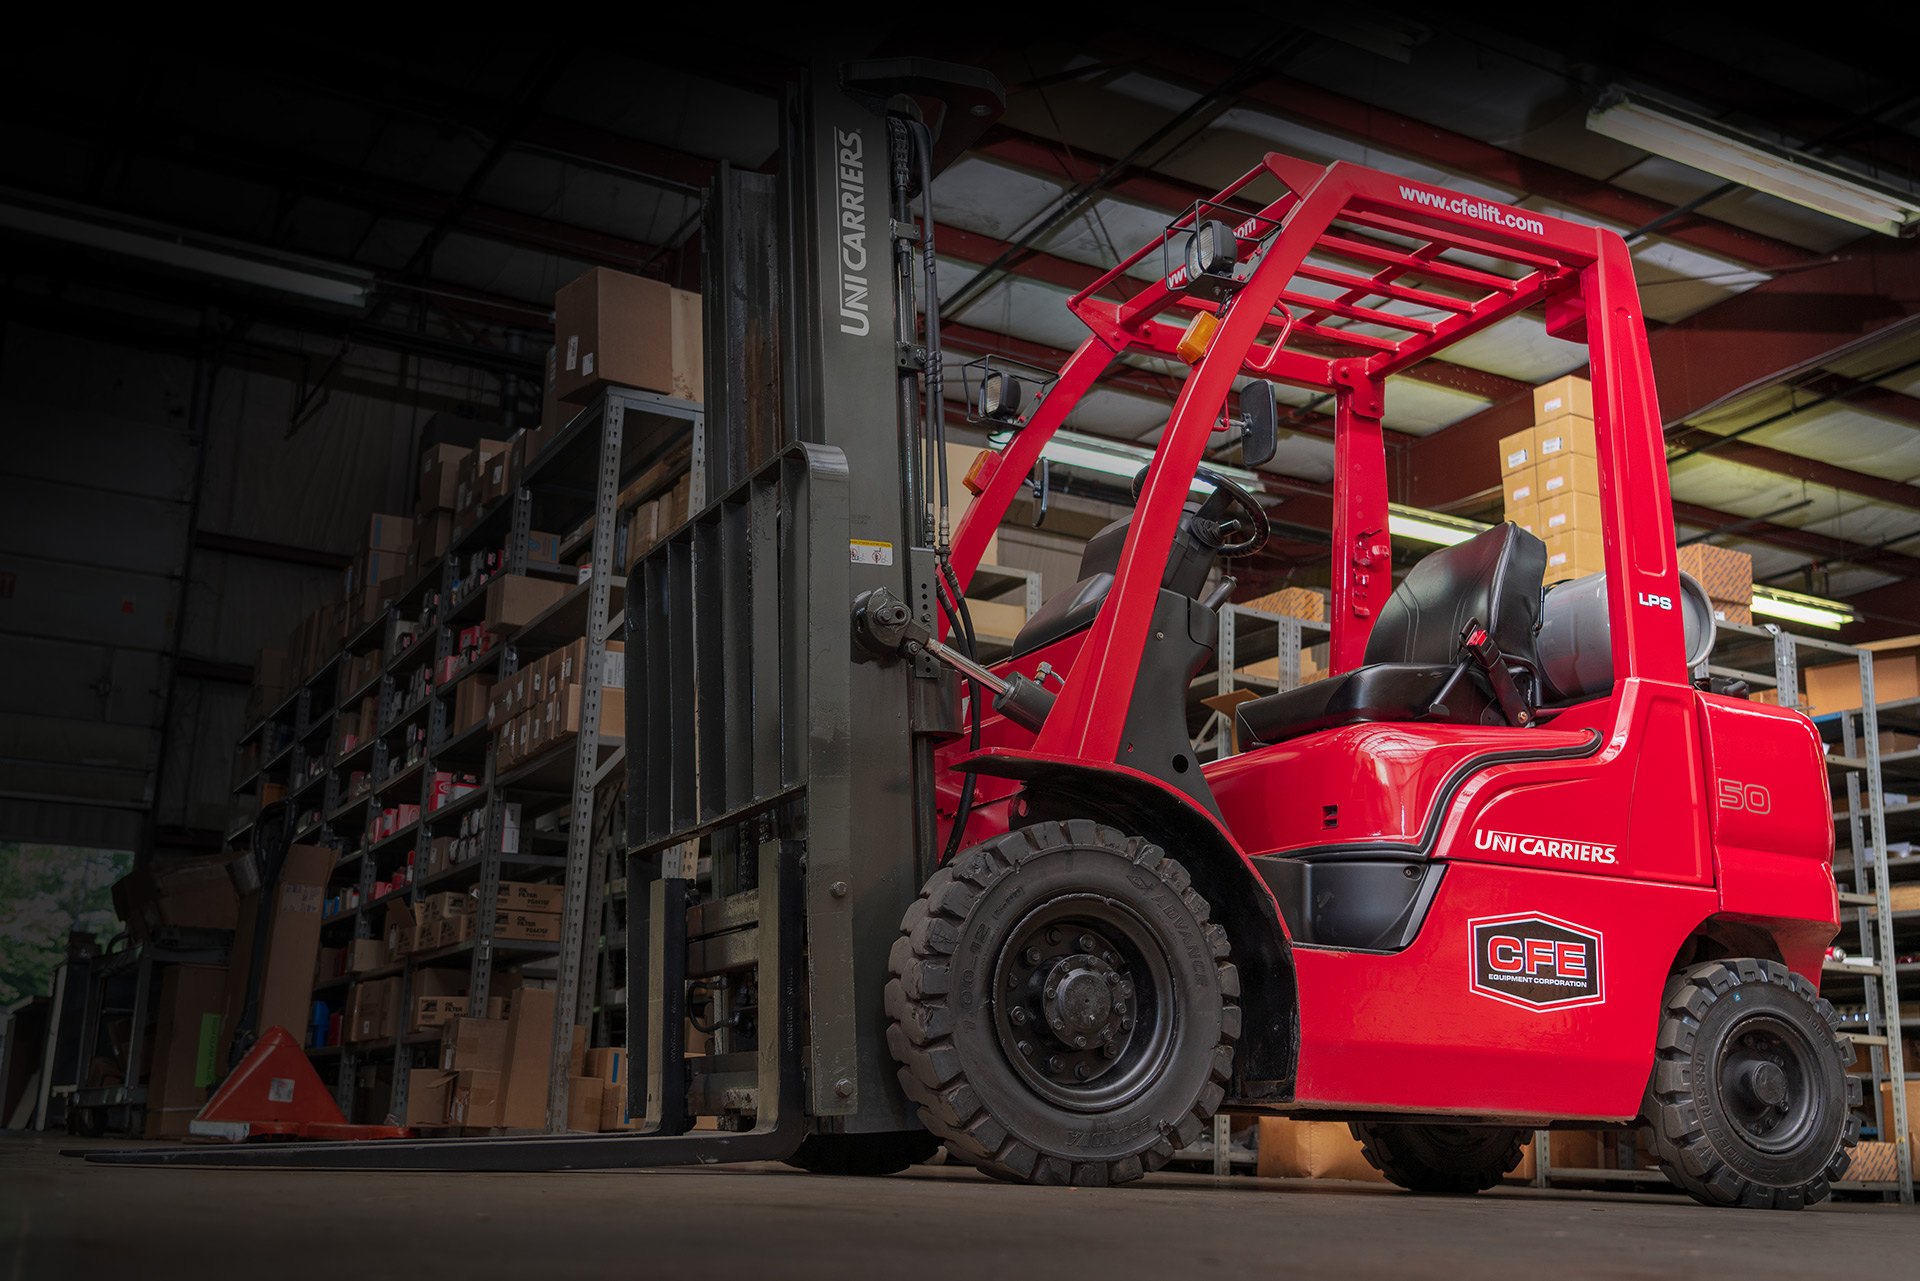 Certified Forklift Experts In Usa Cfe Equipment